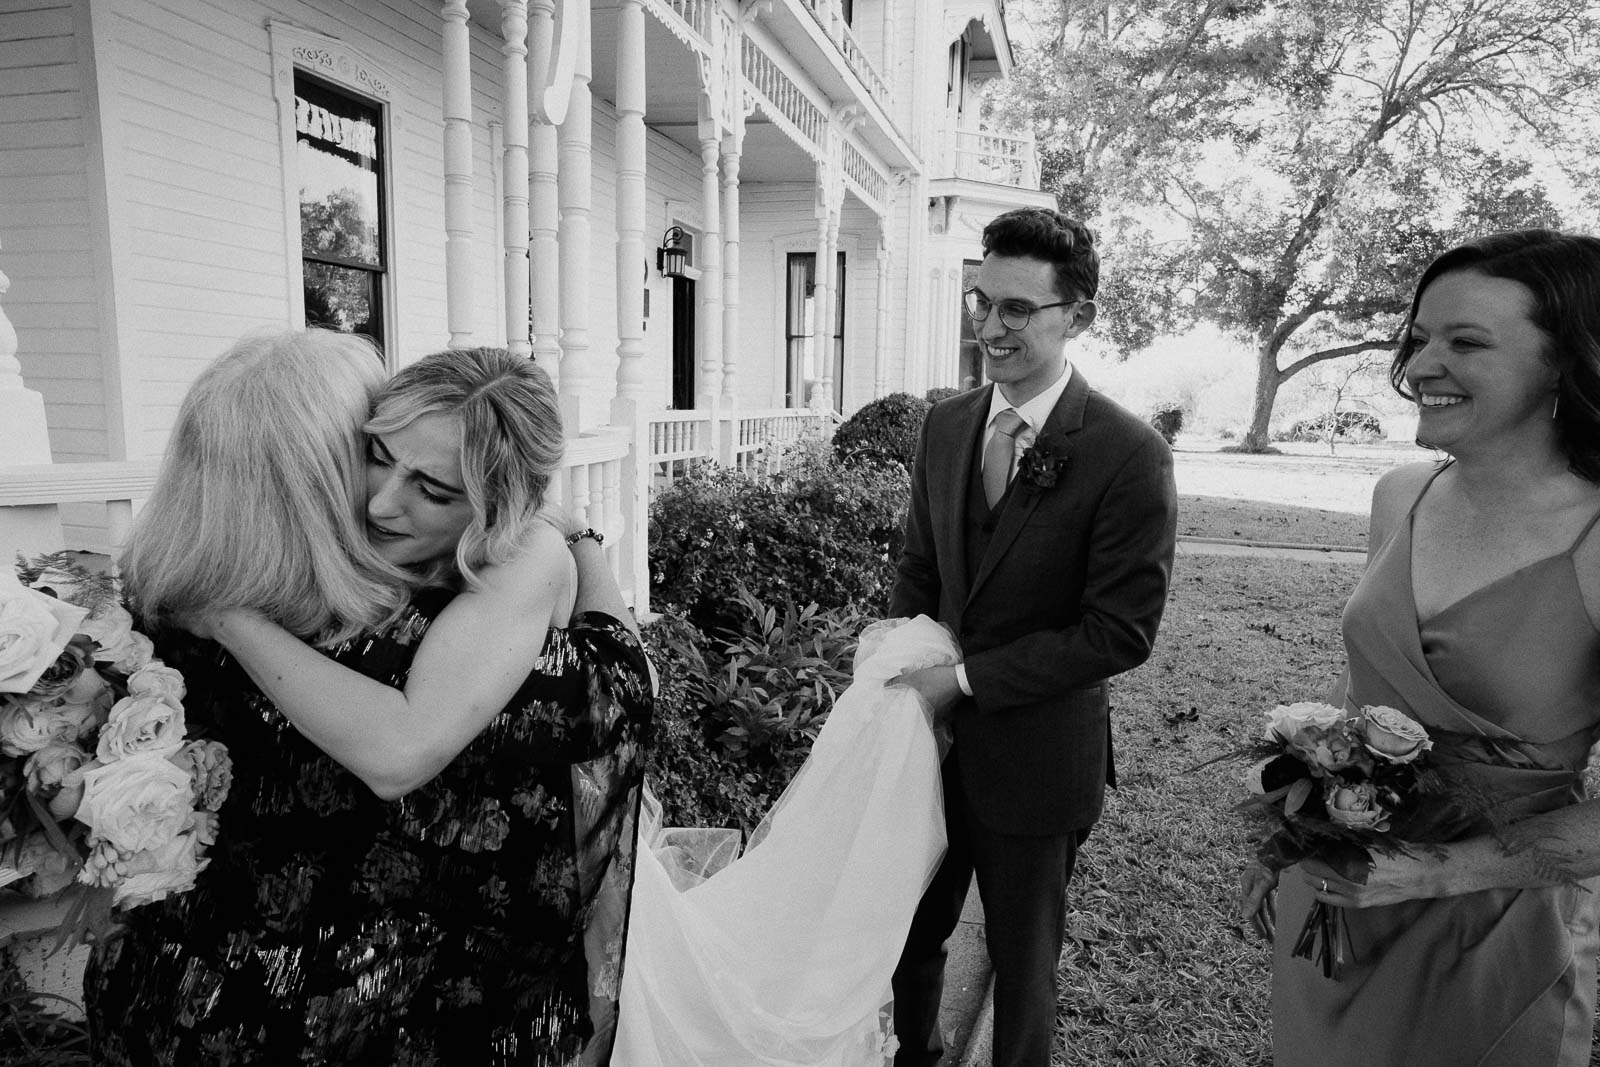 An emotional hug with the bride and a family member as the groom holds the bride's dress